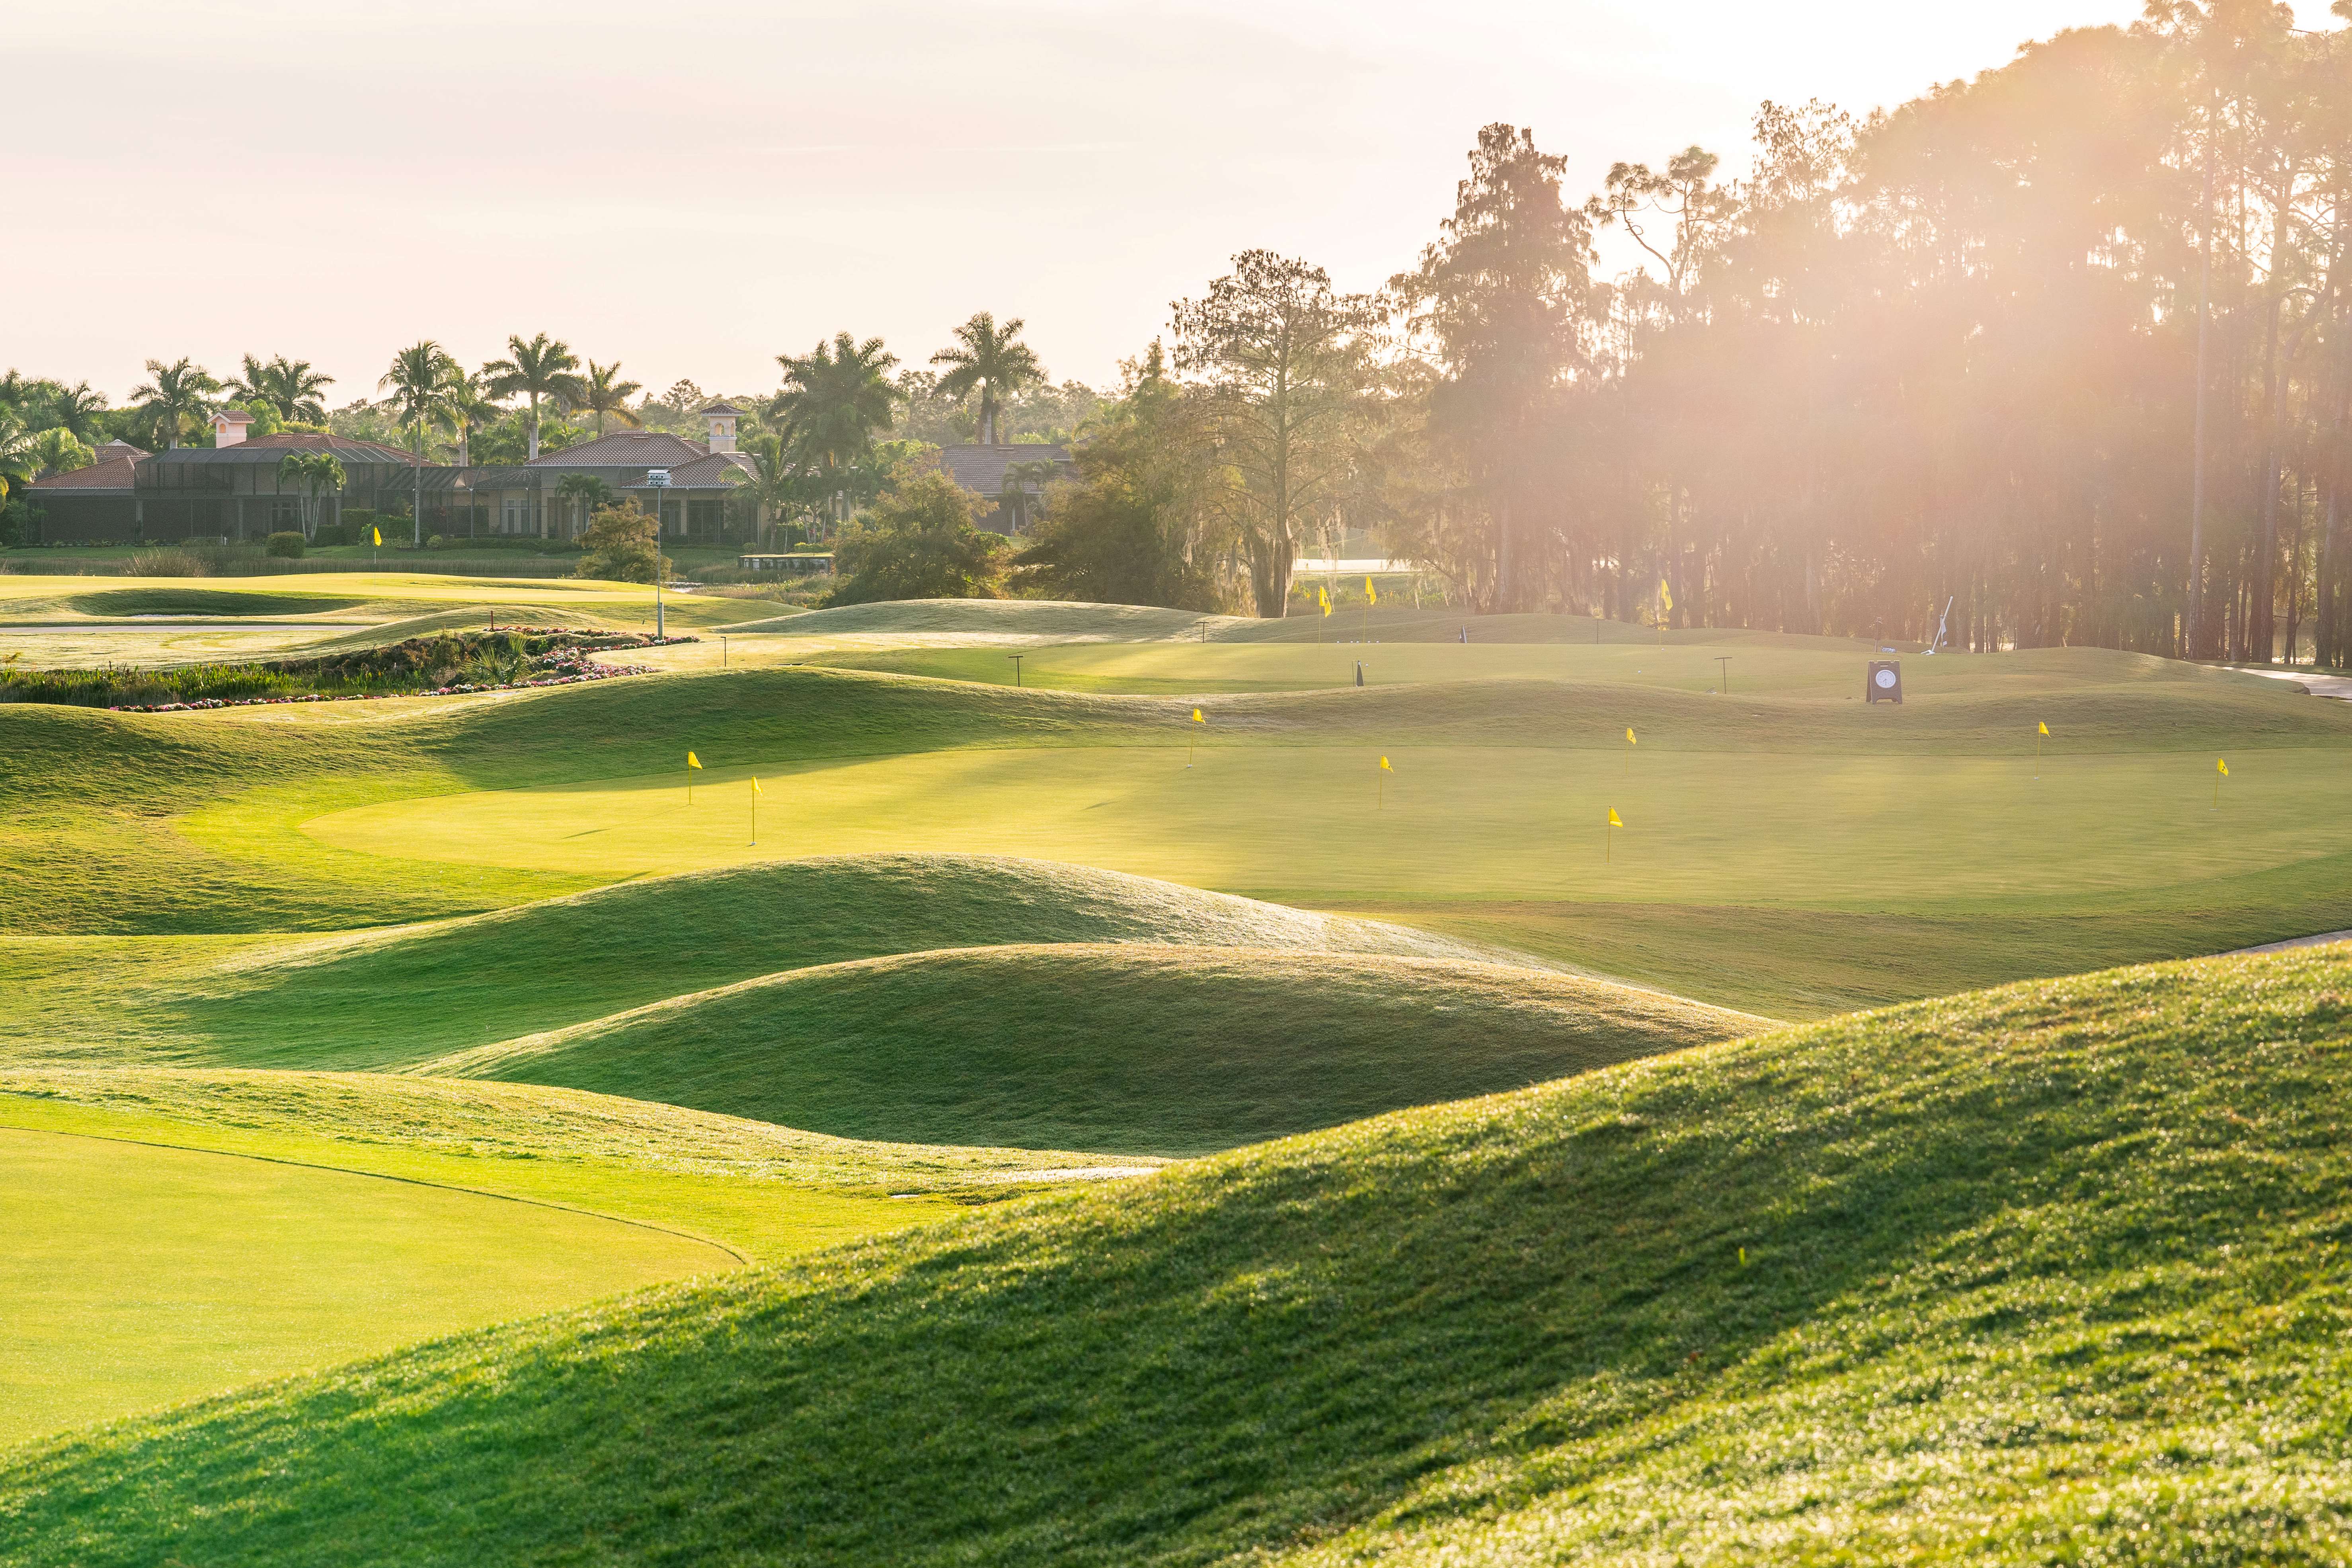 Single, Multi or Bundled: Which Naples Private Golf Club is Right for You?